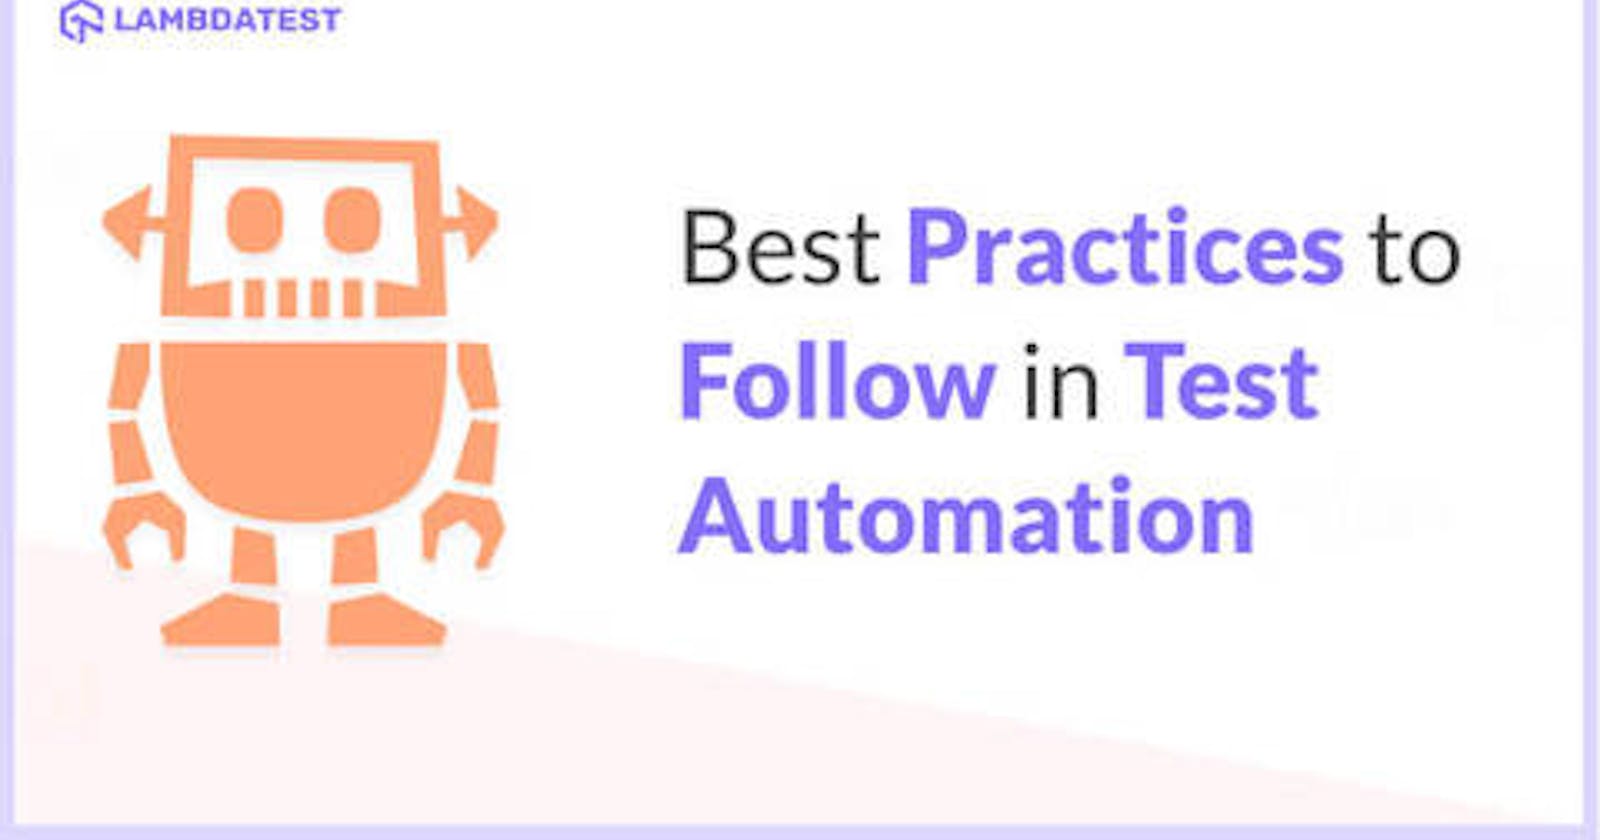 Best Practices to Follow in Test Automation